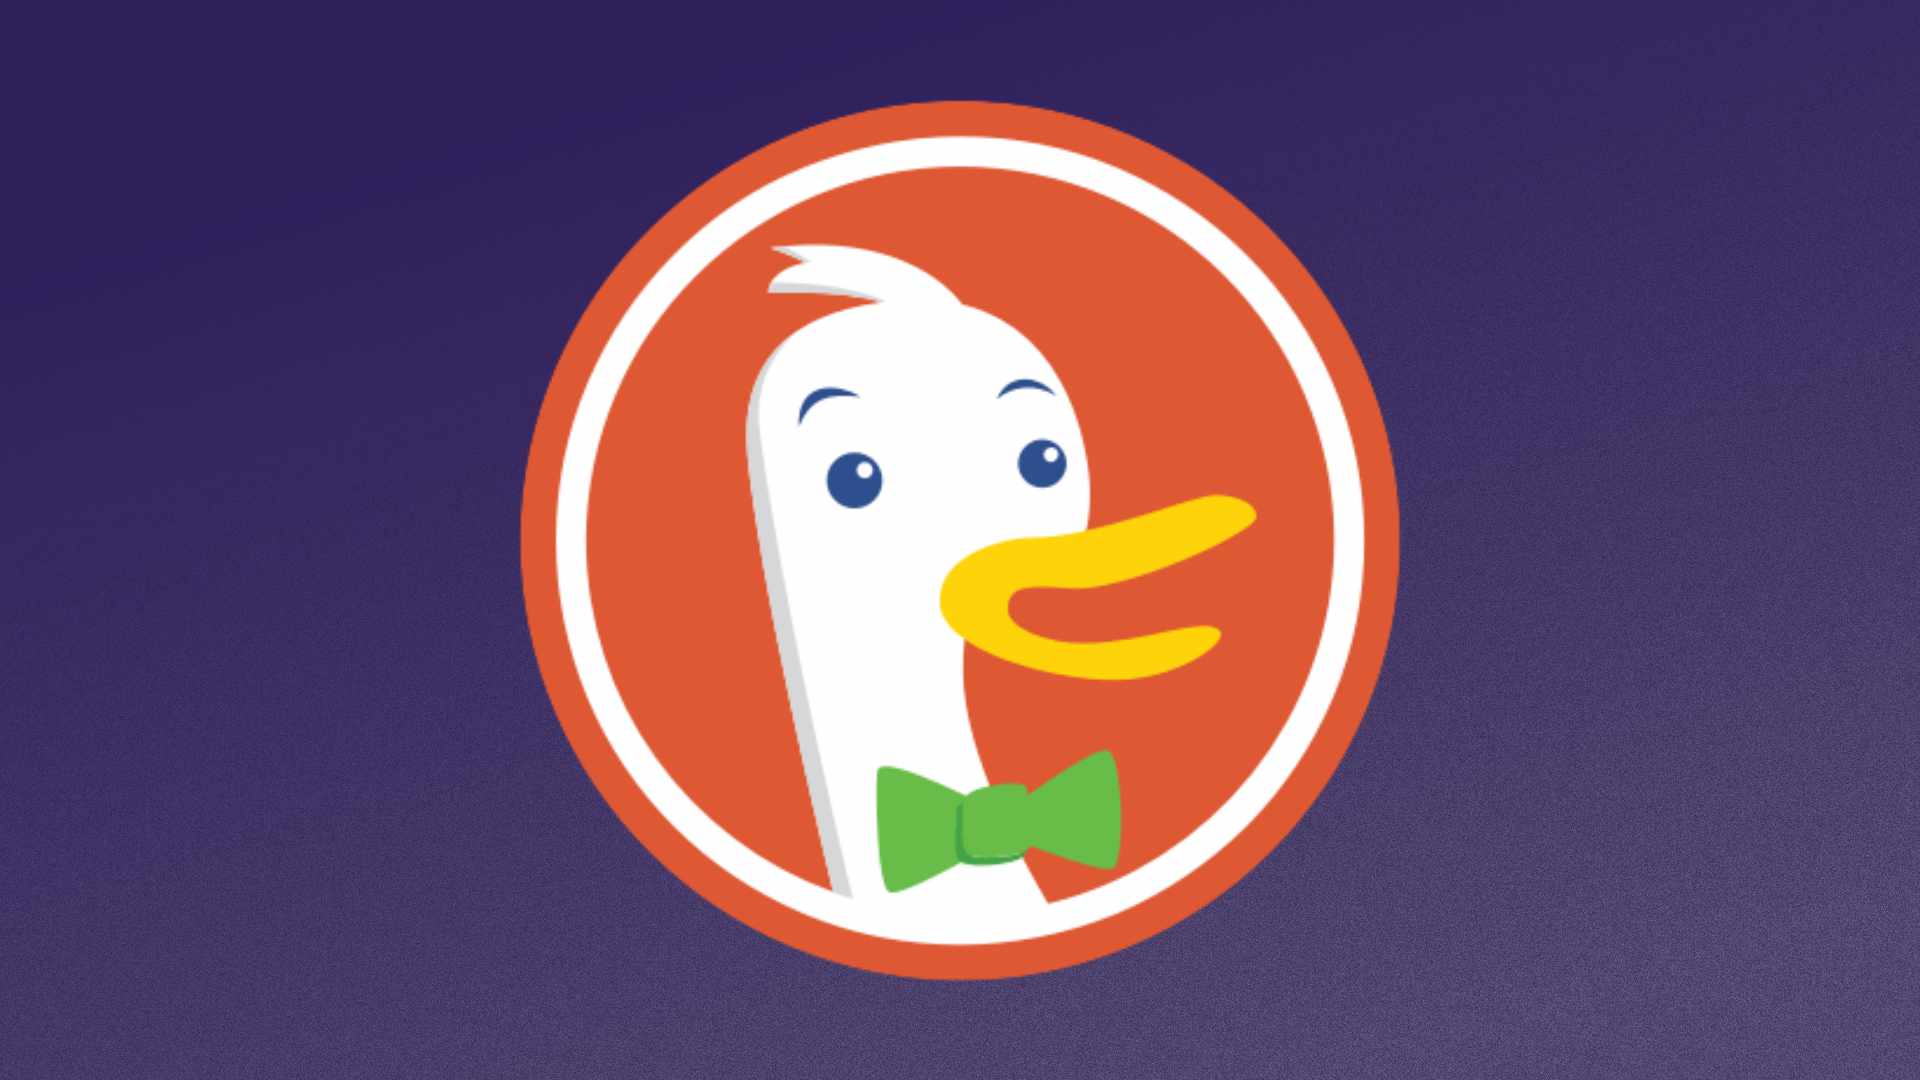 The search engine DuckDuckGo launches its own Bing ChatGPT